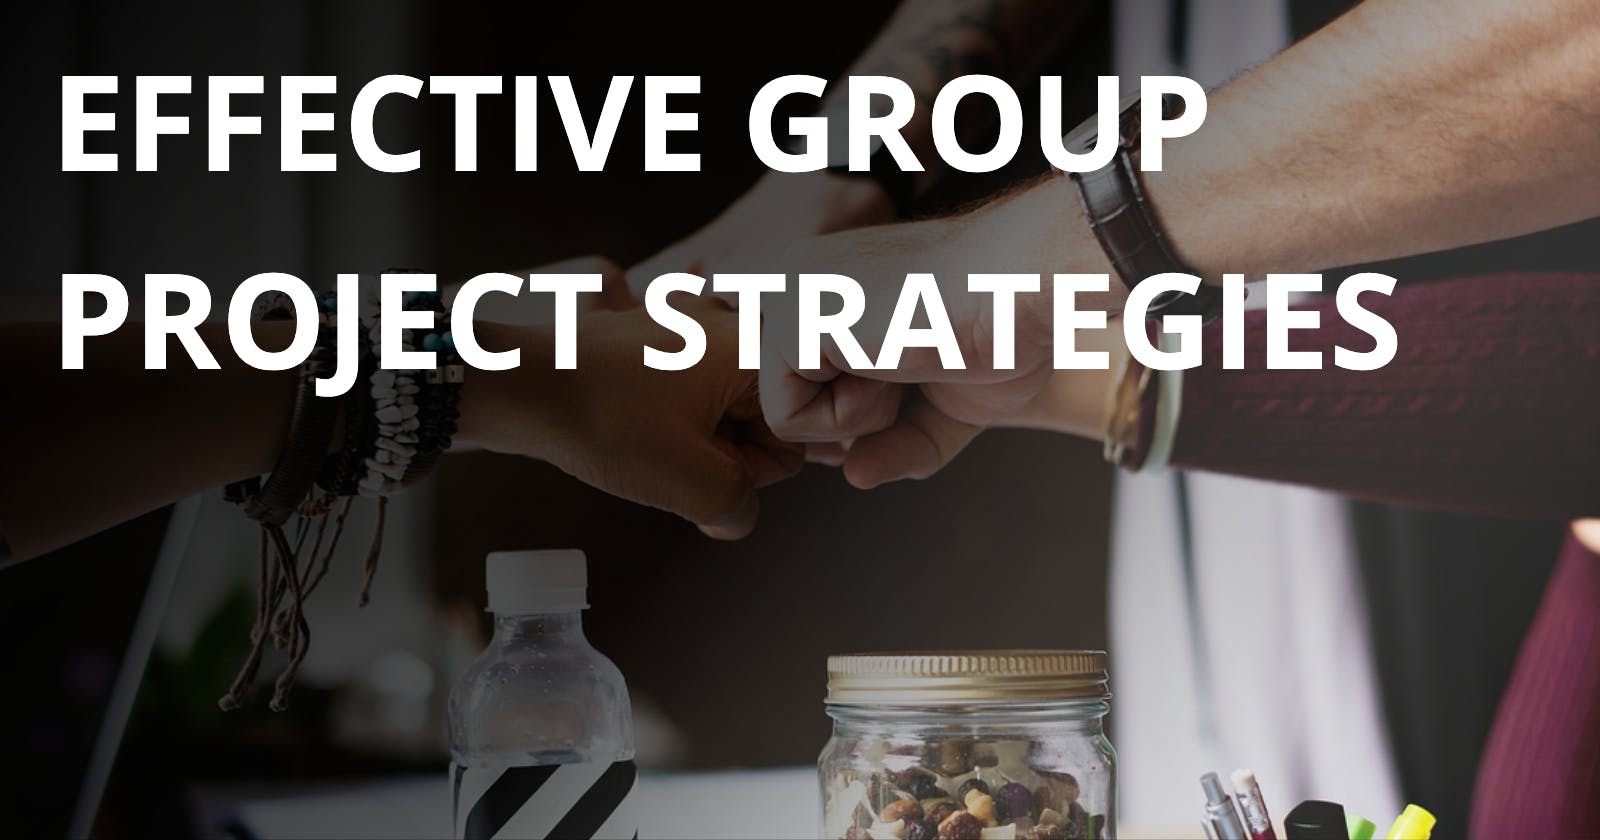 Effective Group Project Strategies - Tips for Success